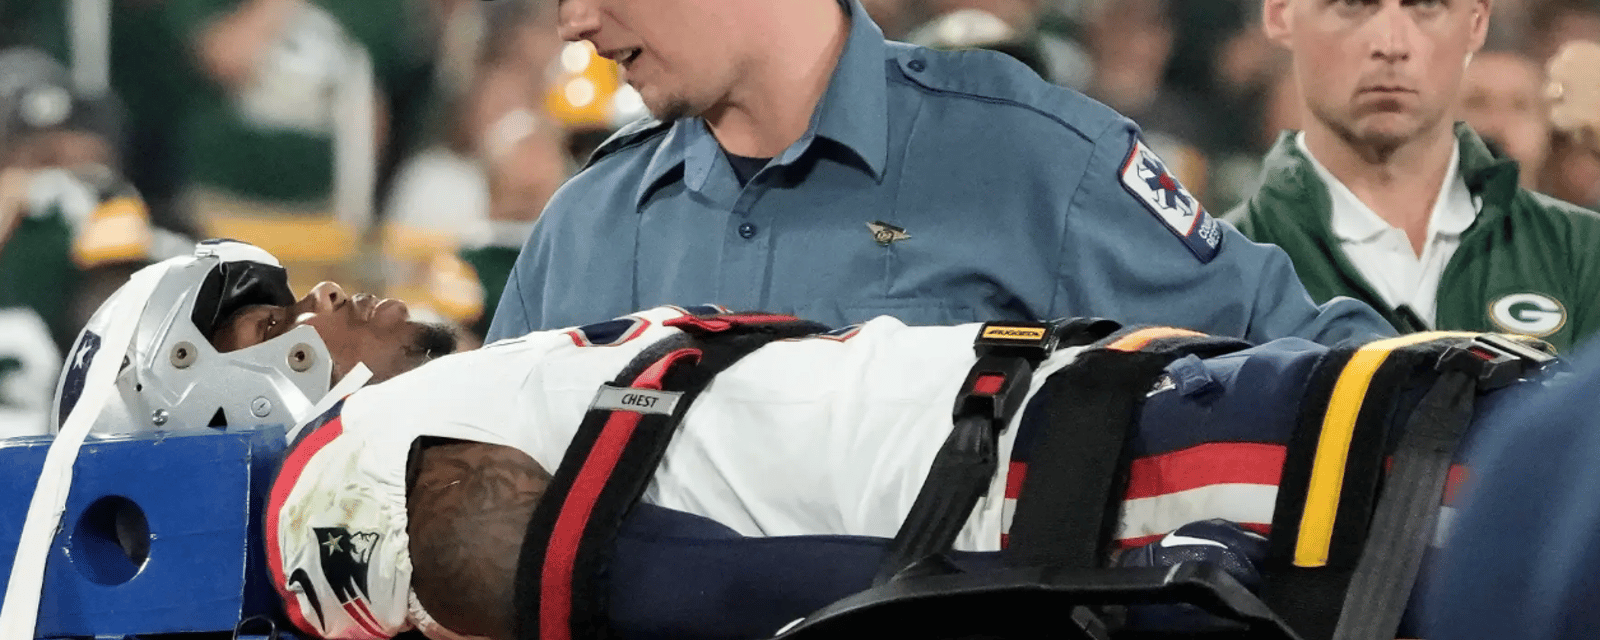 NFL calls Patriots-Packers game after scary injury 